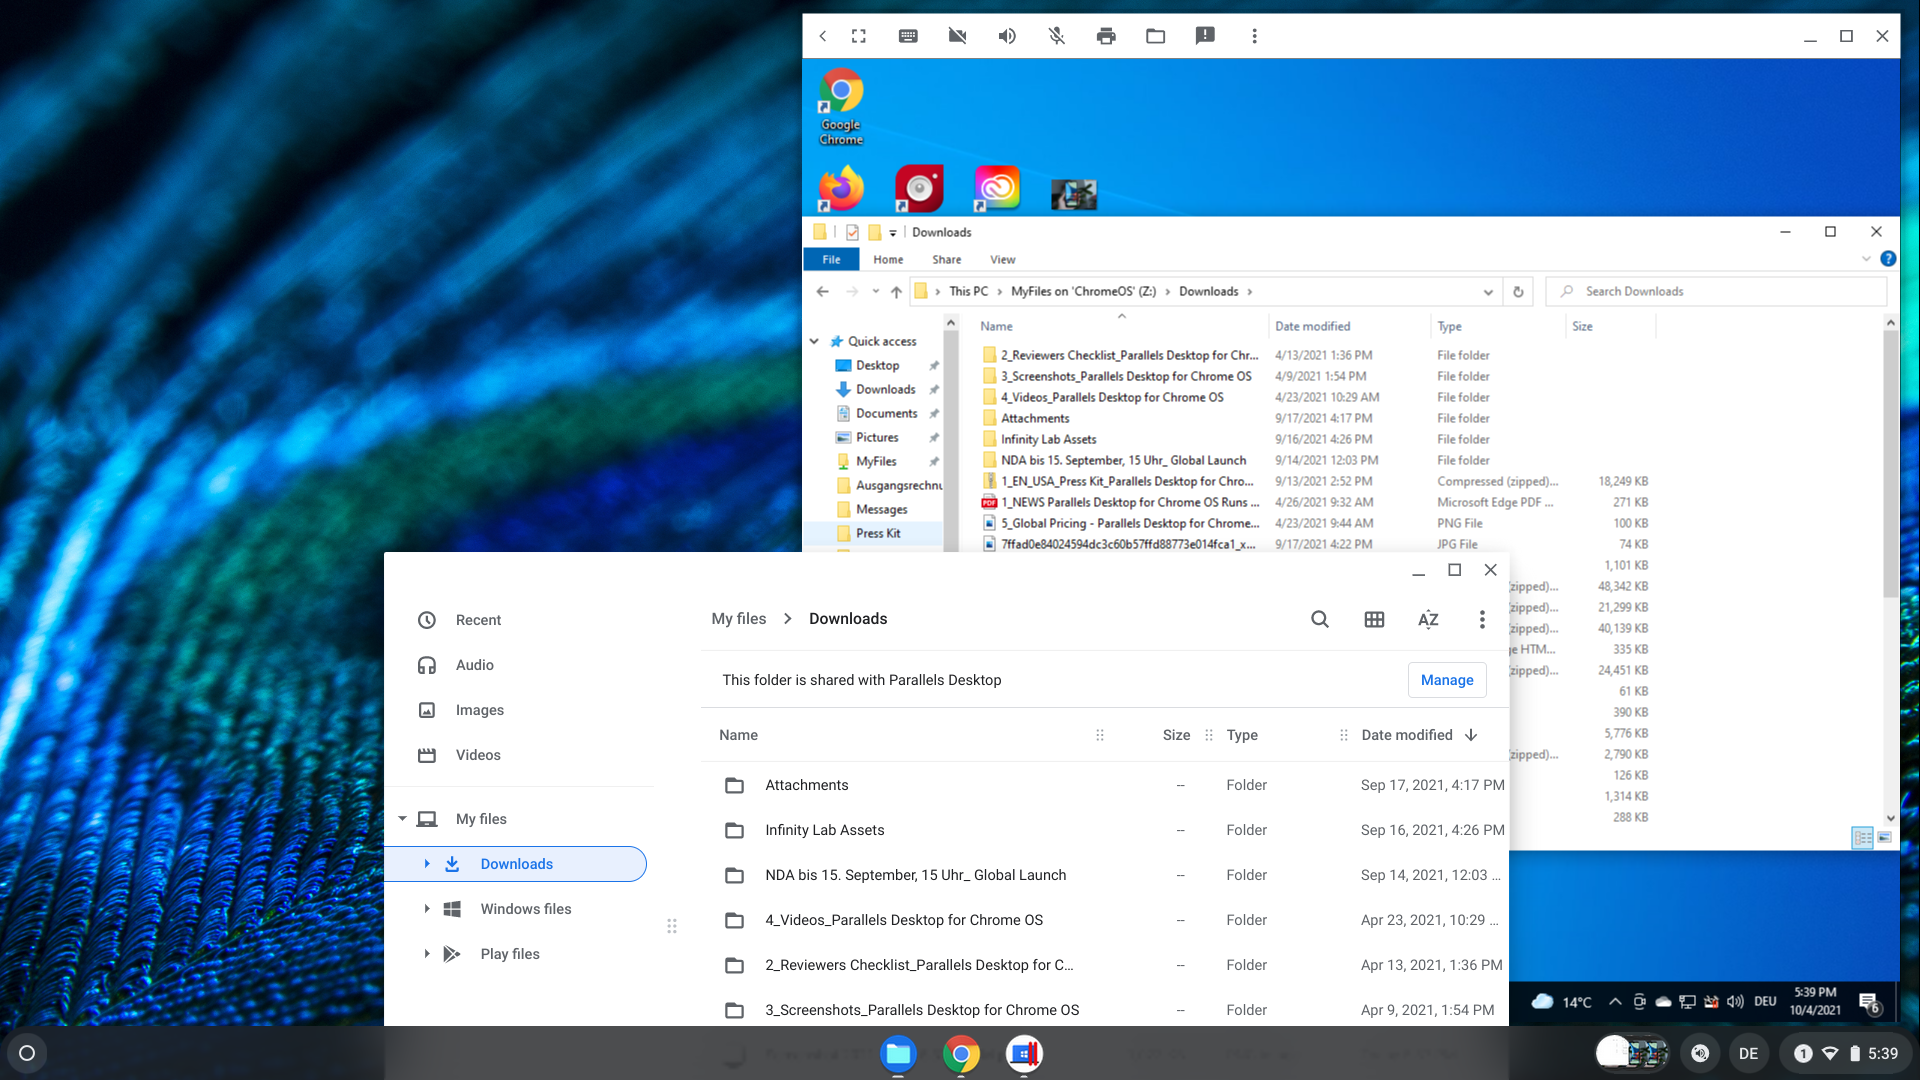 Parallels on Chrome OS Downloads